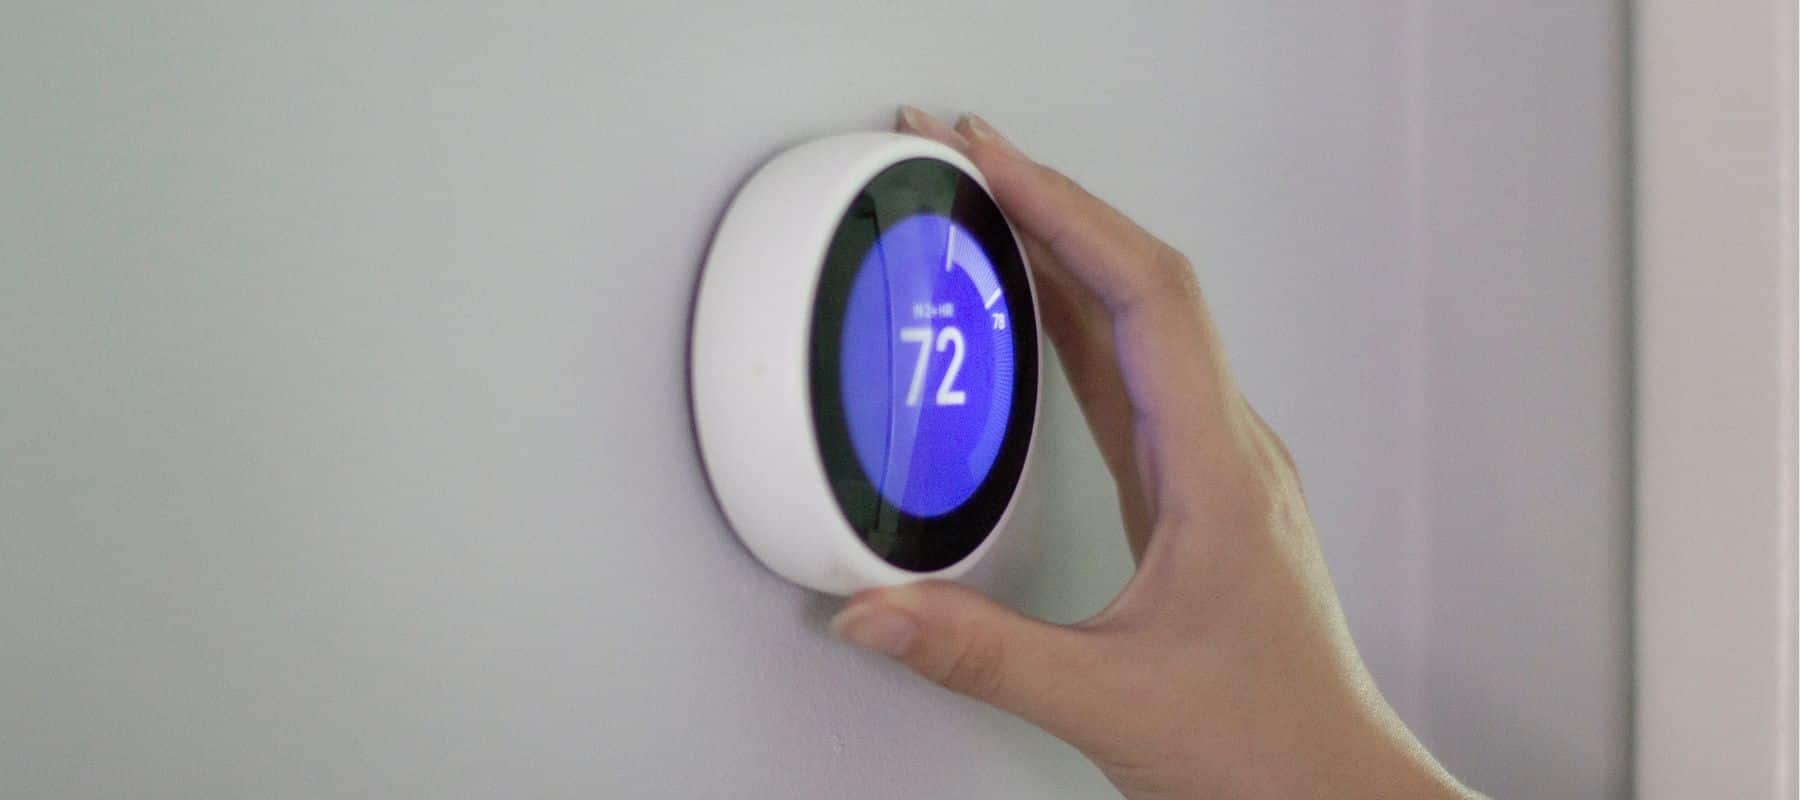 hand turning a smart thermostat that is showing 73 degrees on the screen